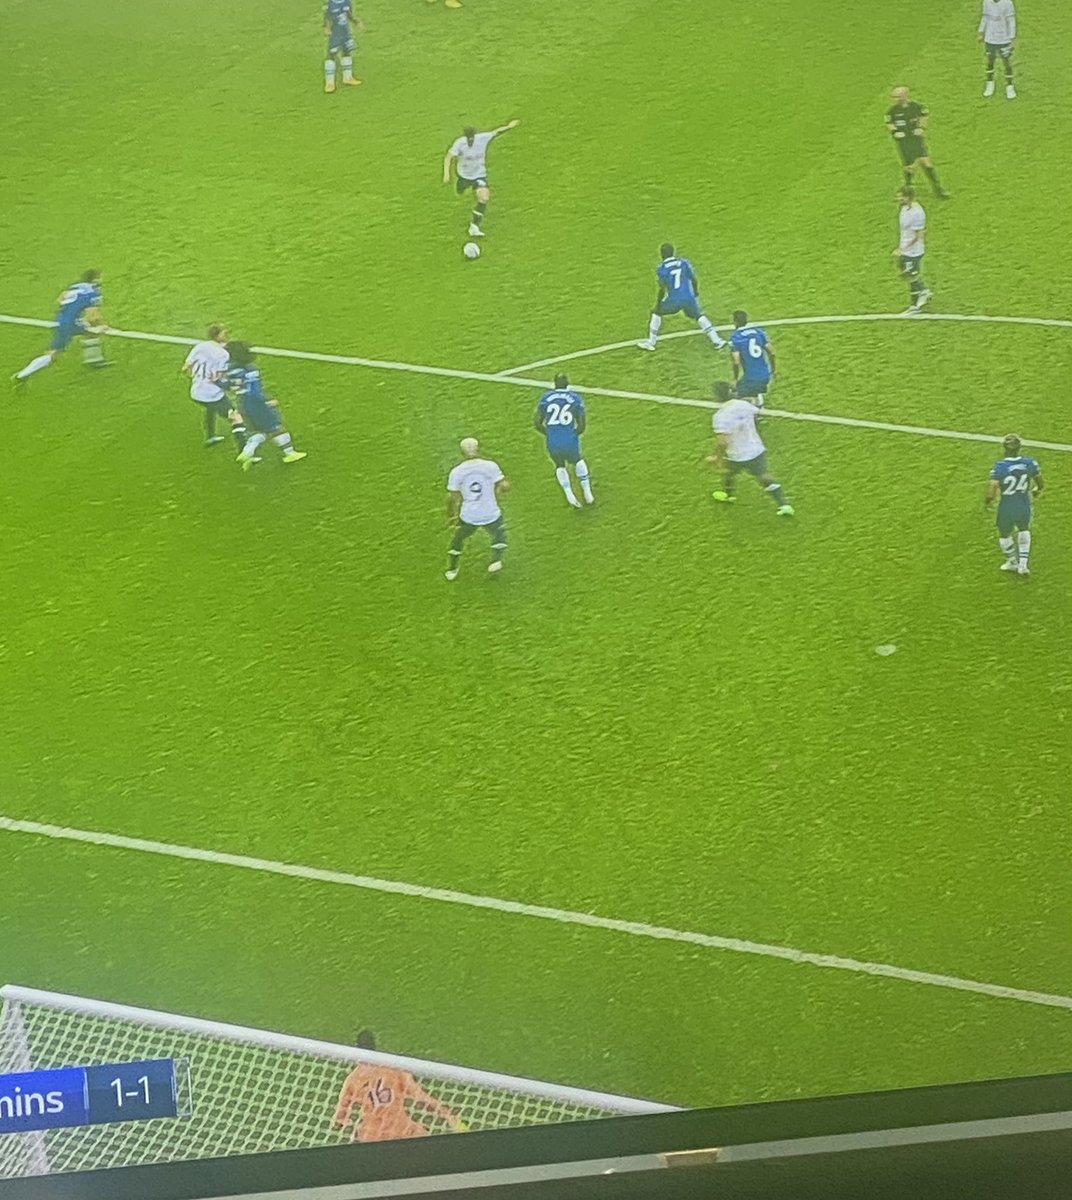 Oh and here’s Mendy having to look round an offside Richarlison for Spurs’ first goal. Other than that, thought the officials had a great game. 👍 #CHETOT